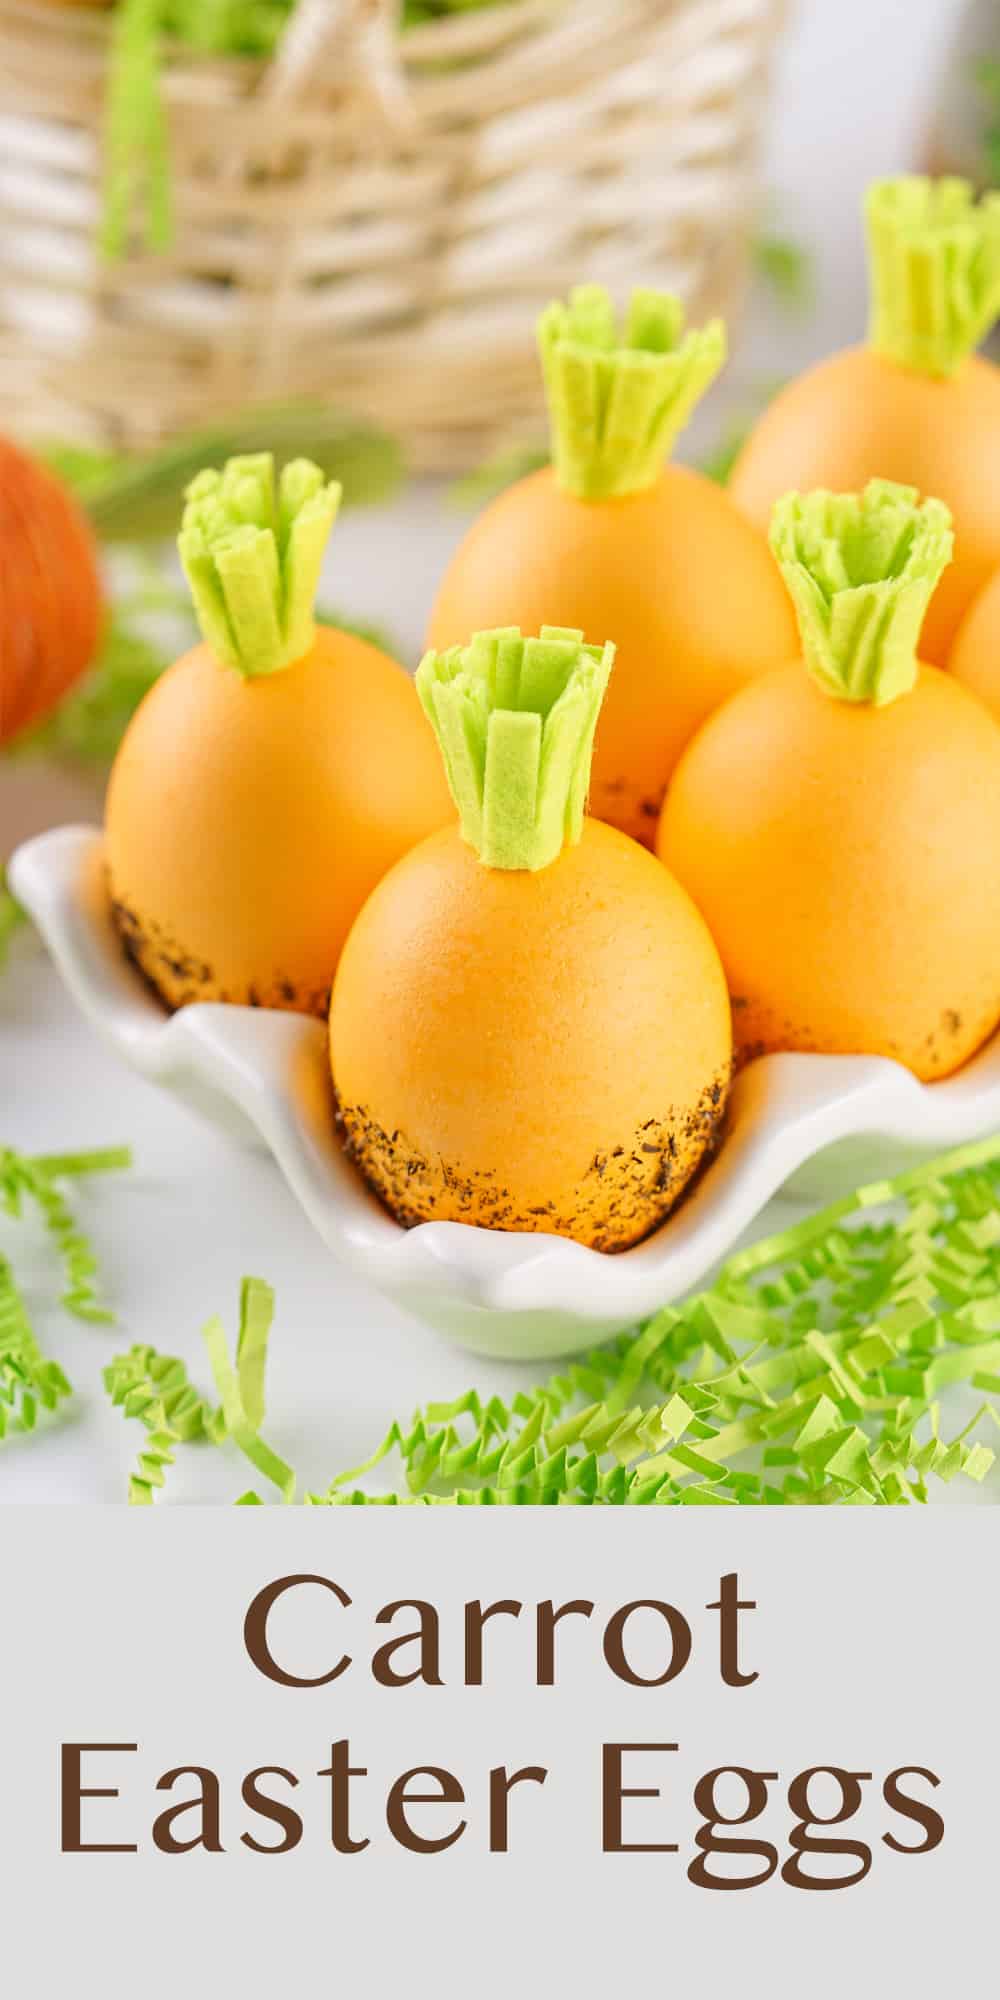 orange dyed Eater eggs with green flt top to look like carrots in a white egg holder with Easter decor around it.